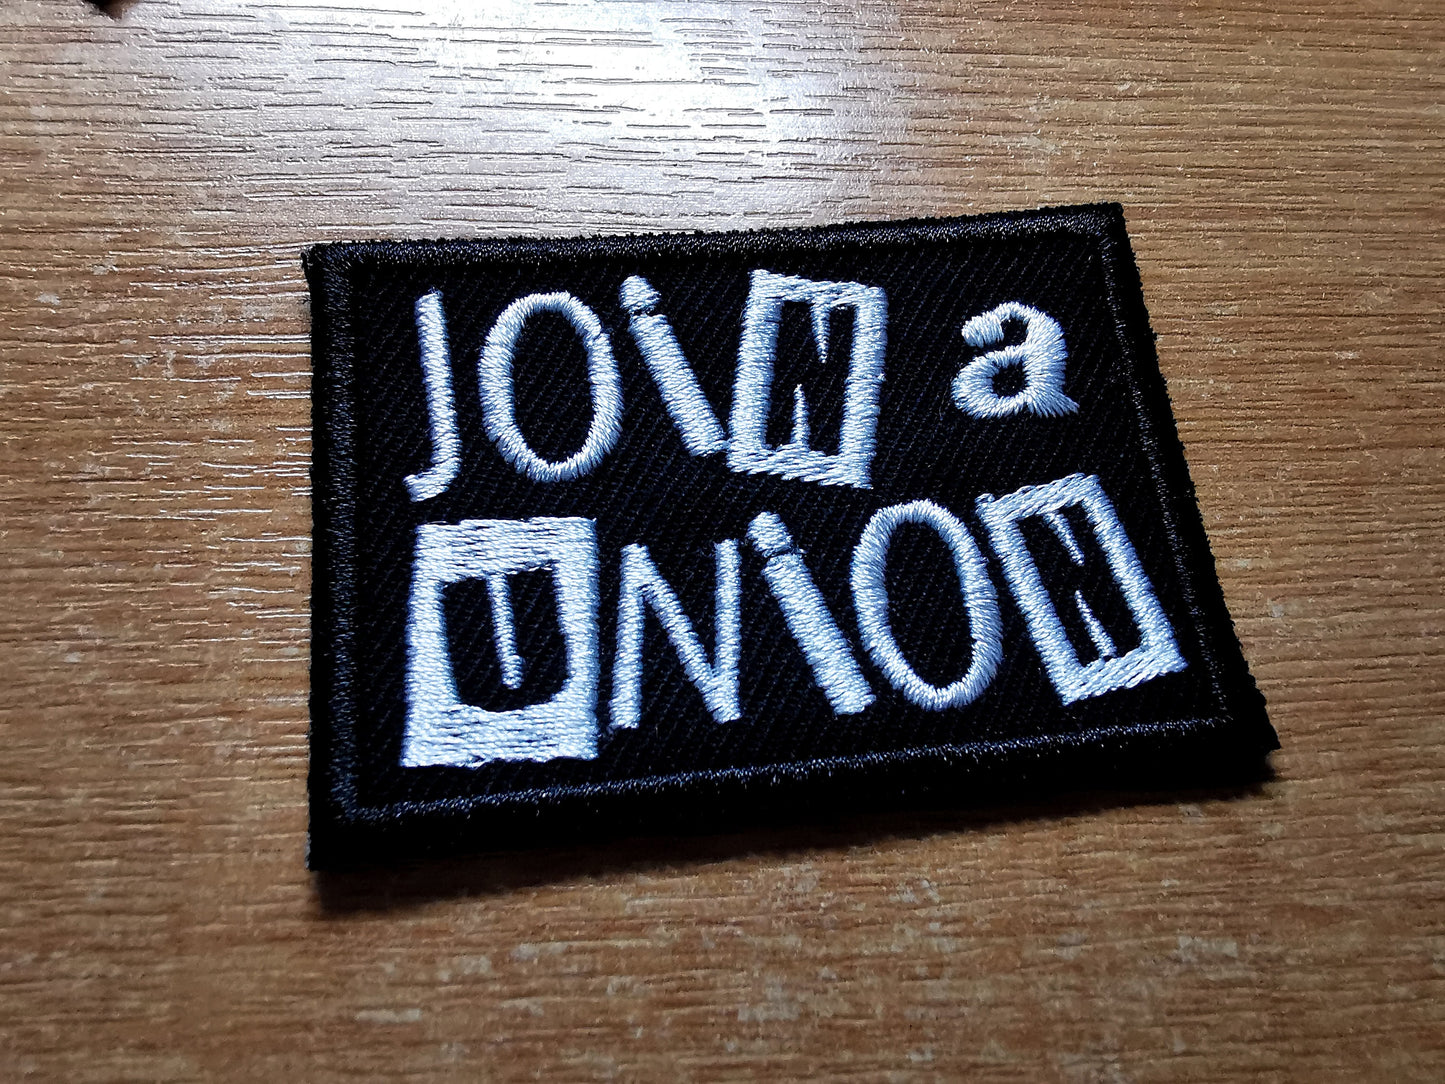 Join a Union Punk Embroidered Iron On Patch Politics Workers Labour Great Resignation